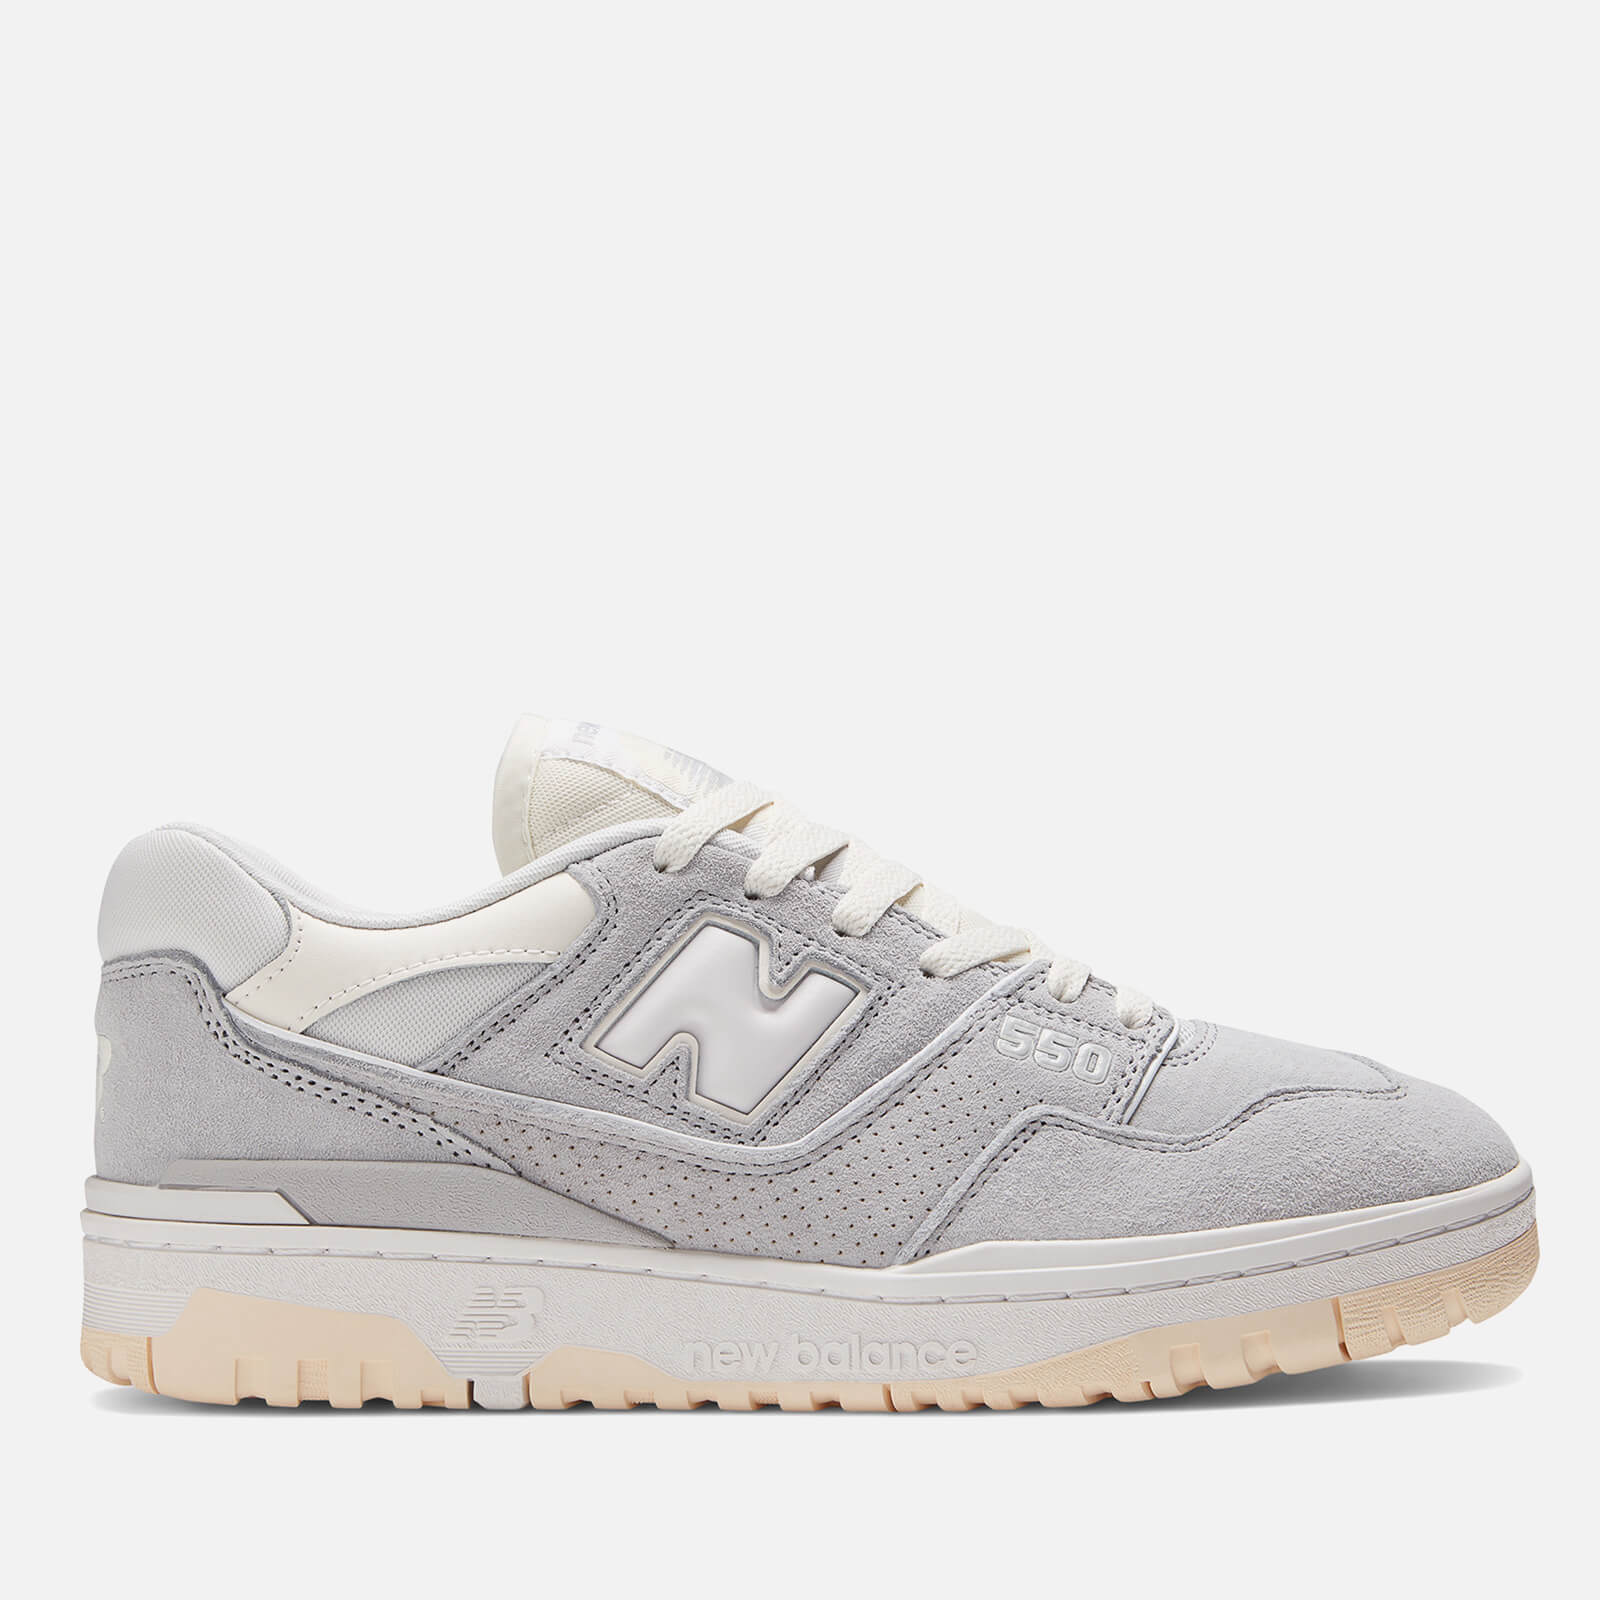 New Balance 550 Premium Suede and Leather Trainers - UK 7